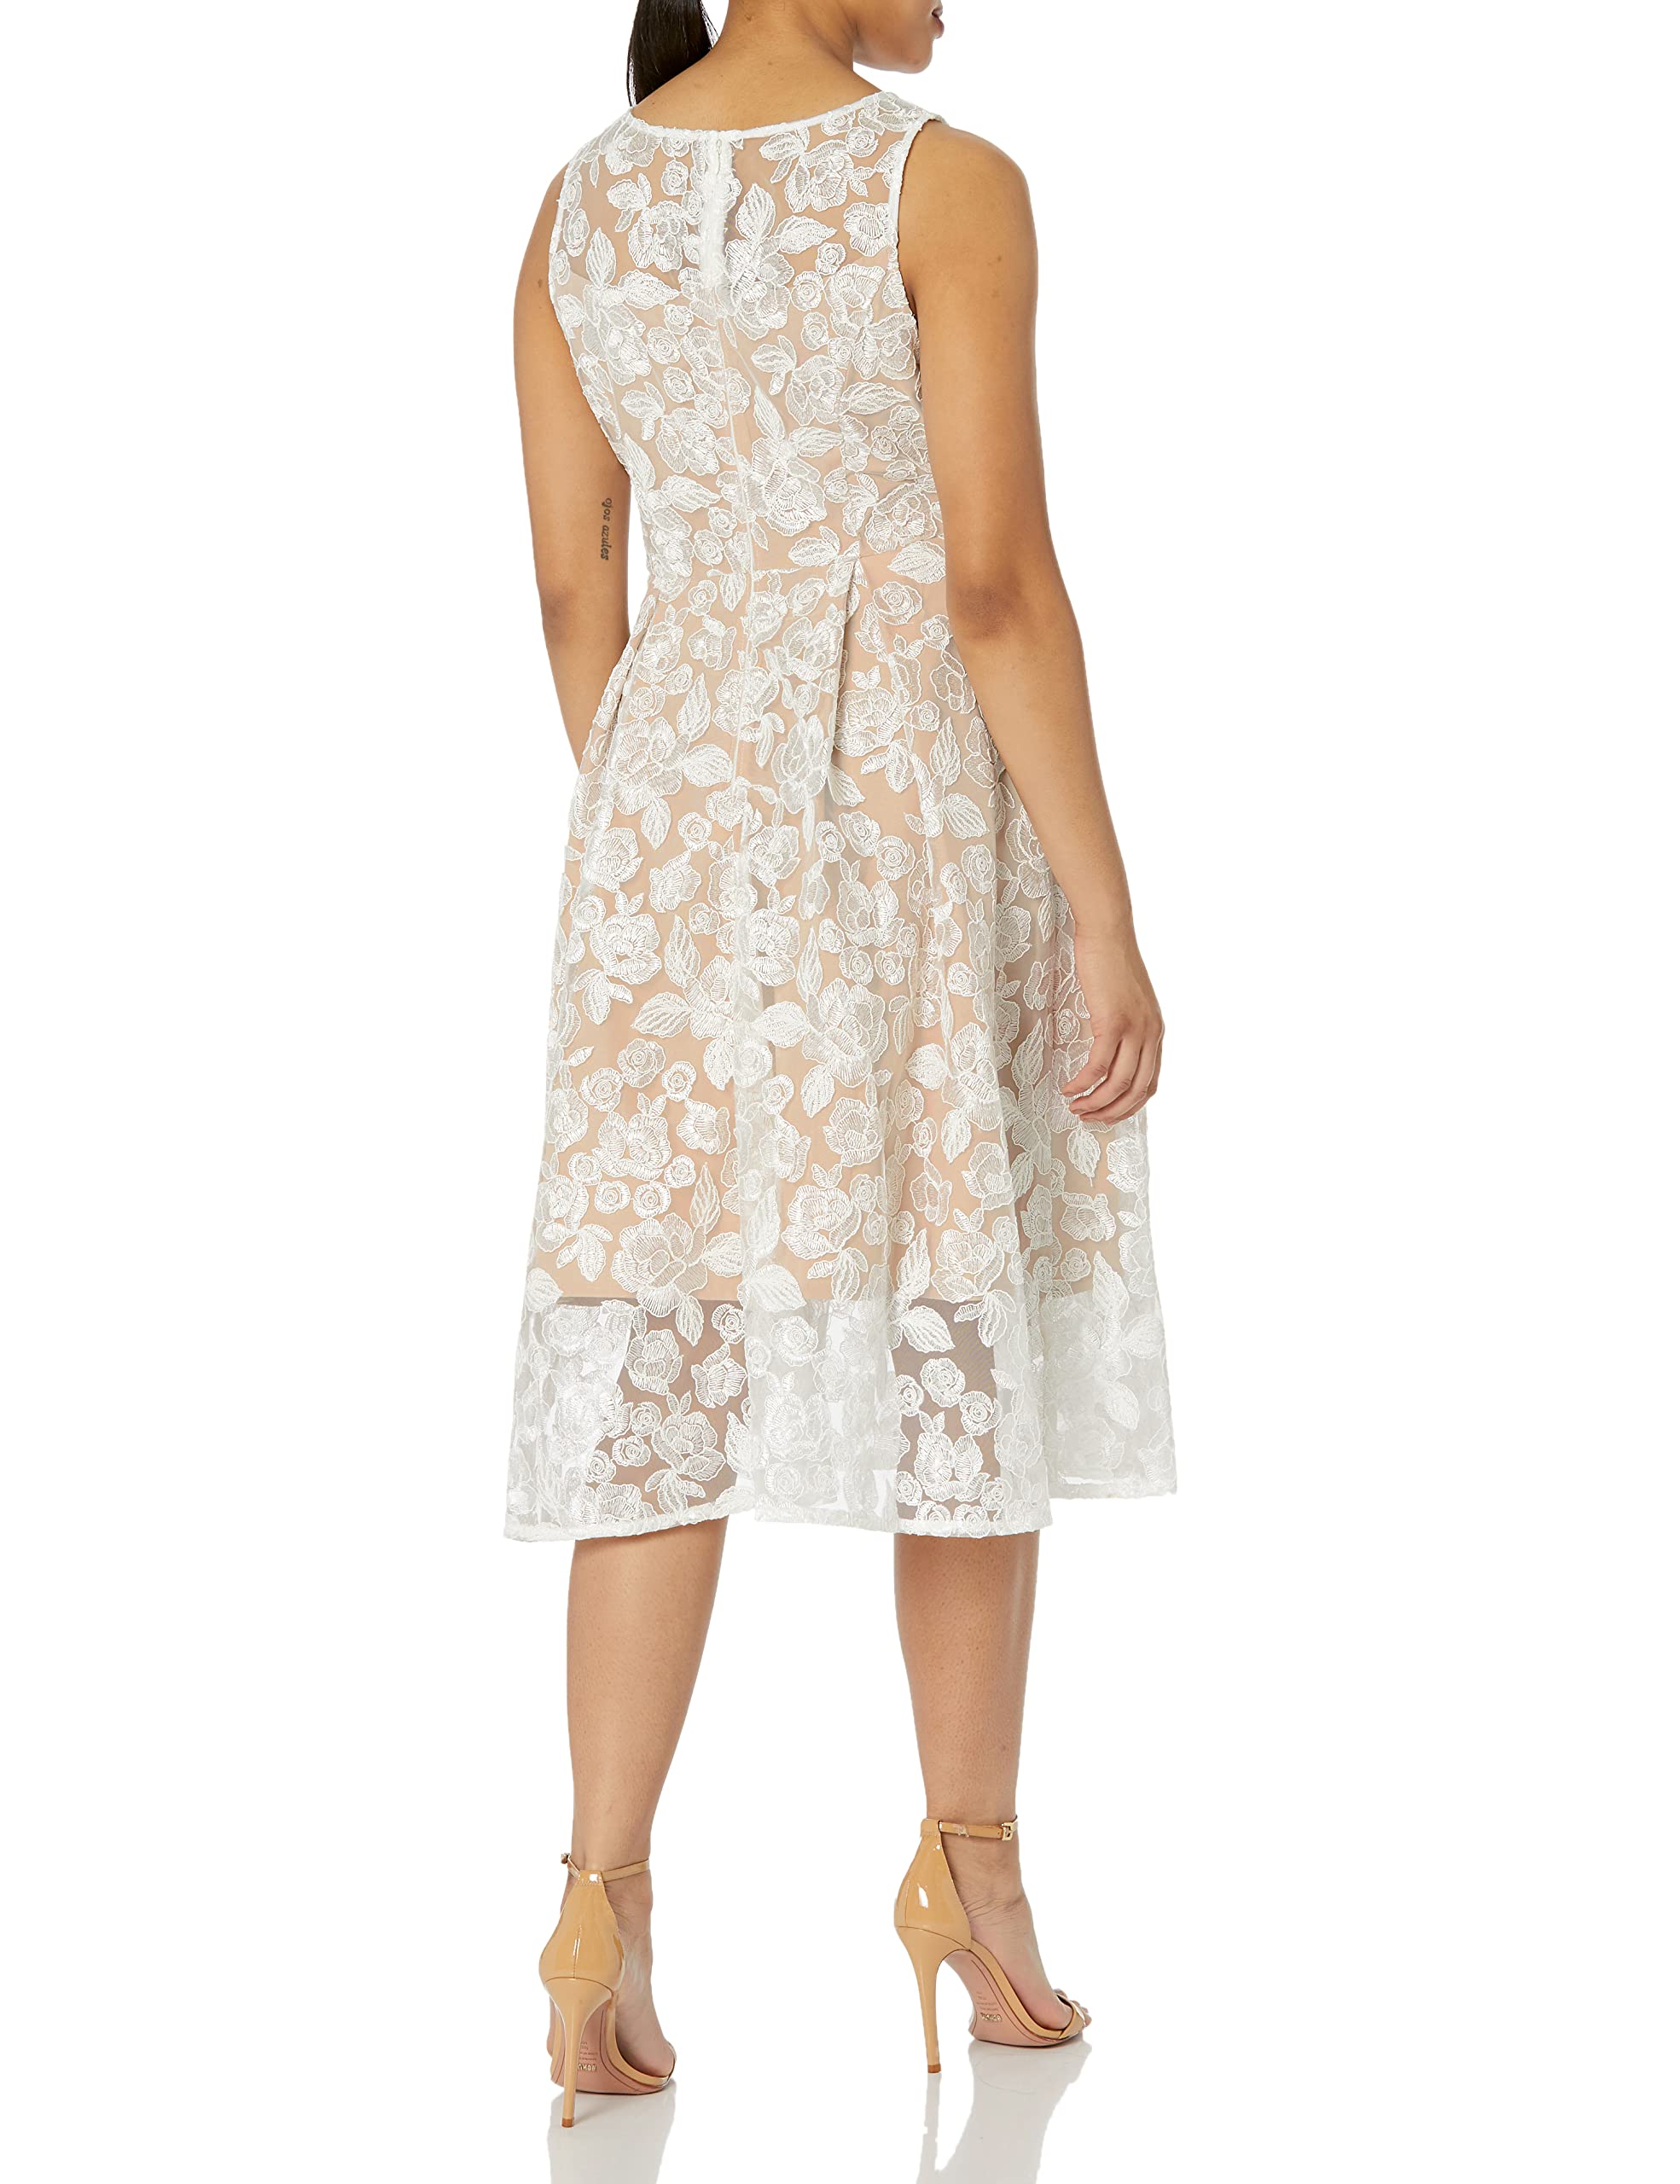 Adrianna Papell Women's Embroidered Tea Length Dress